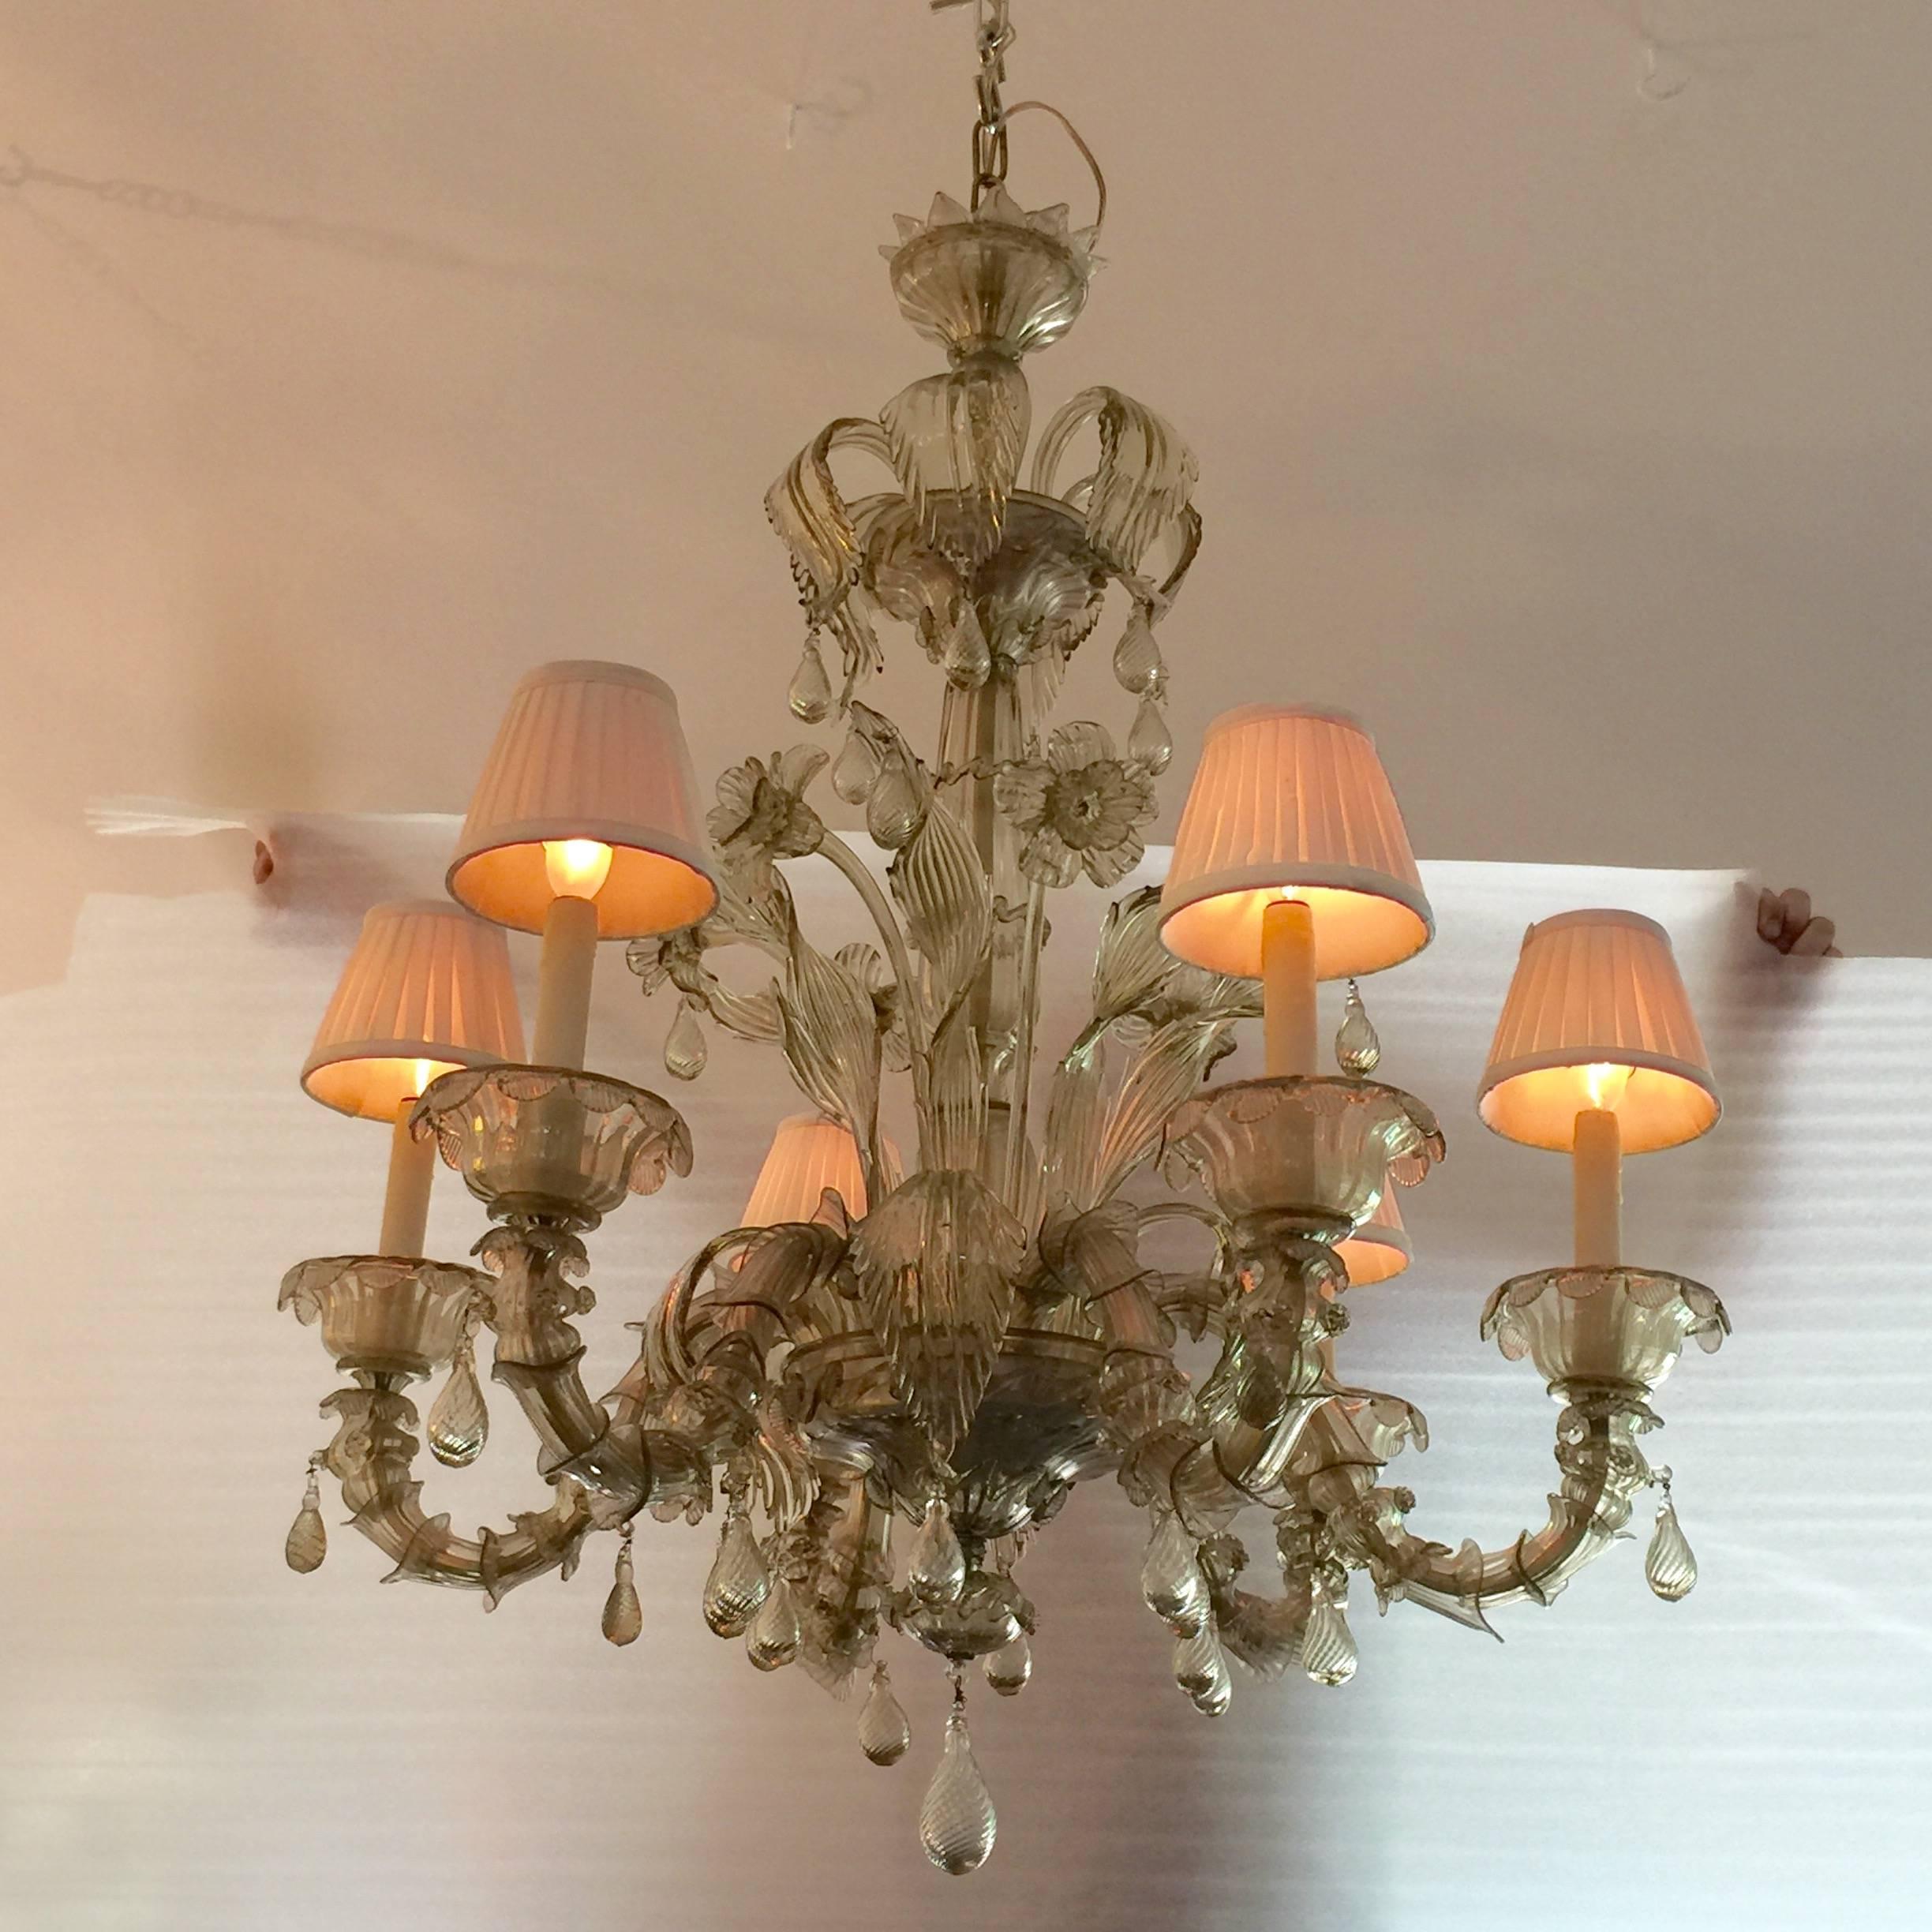 This wonderfully elegant and detailed chandelier by Barovier e Toso, is an exceptional example of handmade Murano fixtures on a grand scale.

This has six arms and shades, many flourished stemmed flowers and leaves with pear drop accents. The